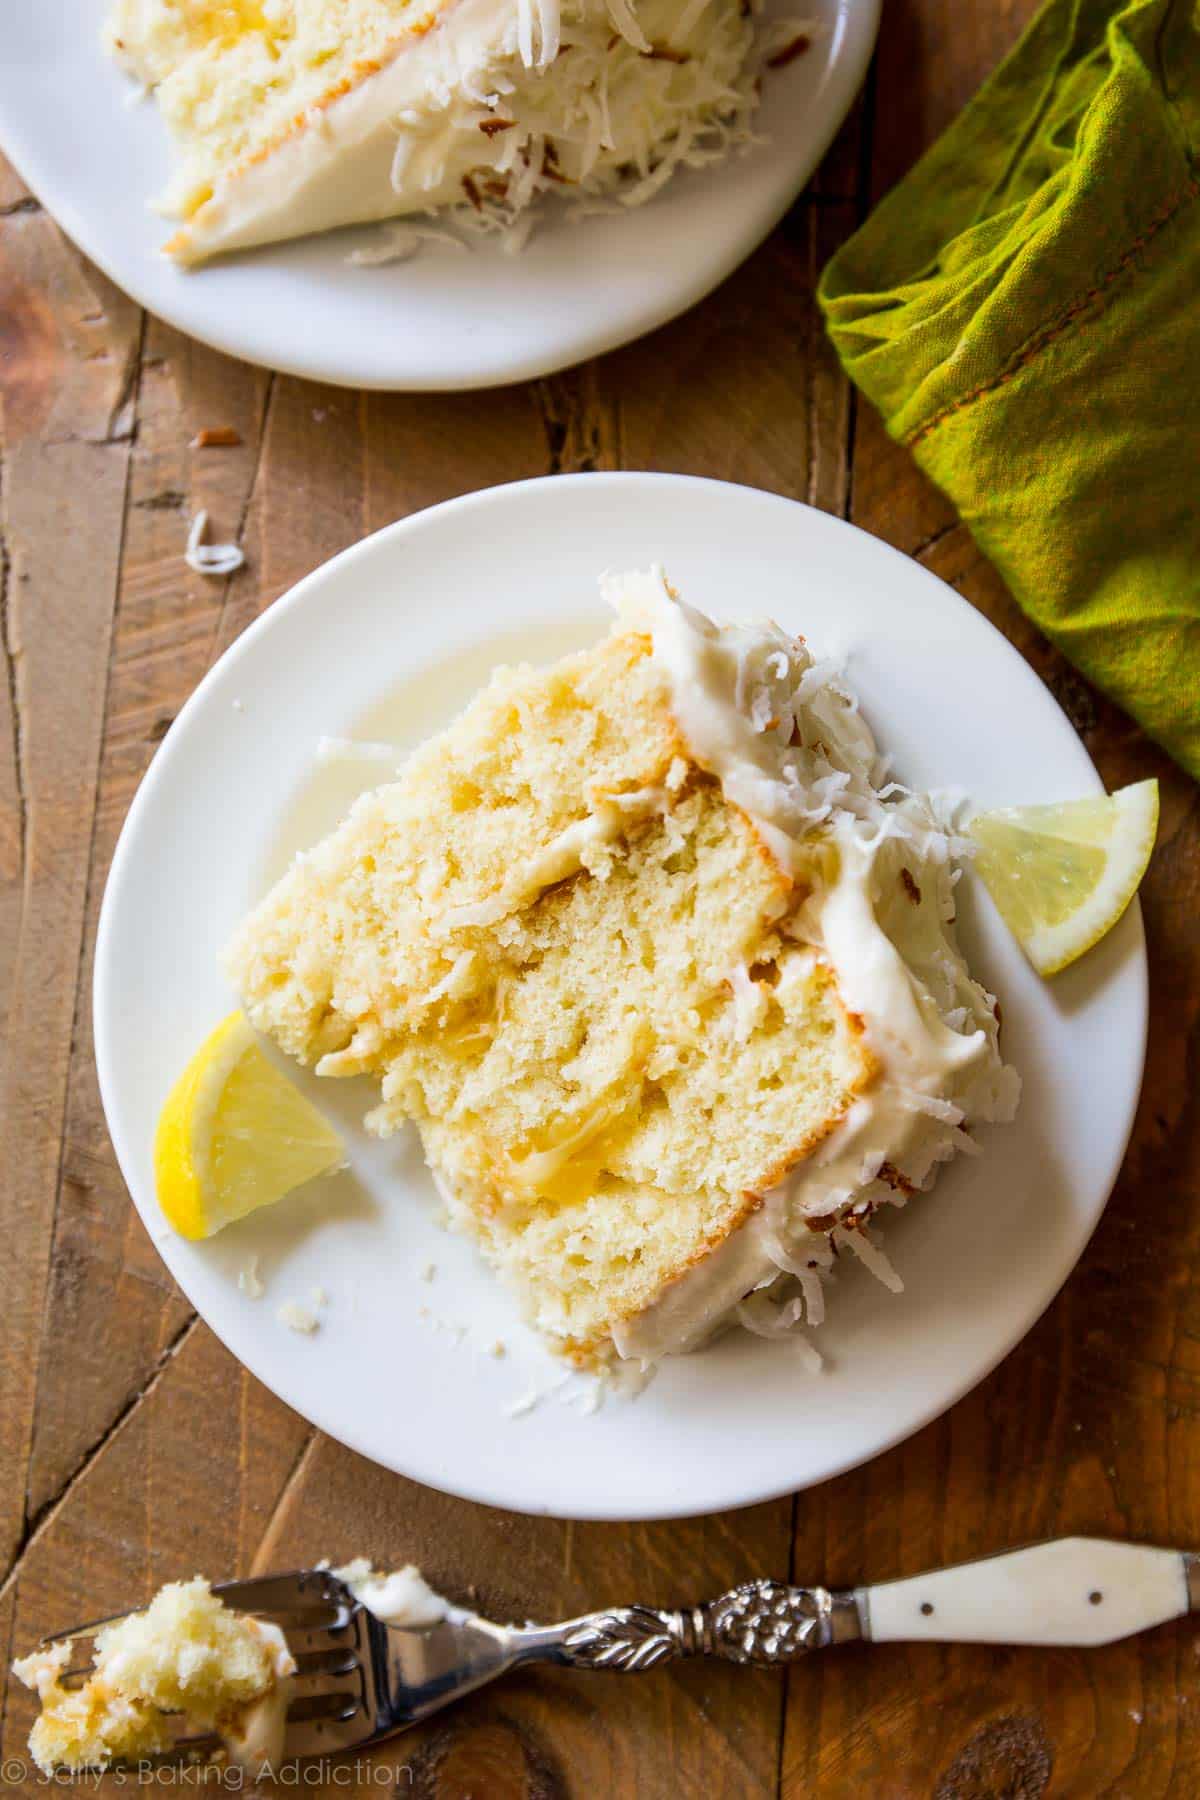 Lemon coconut cake, with deliciously moist coconut cake layers, homemade lemon curd, toasted coconut and cream cheese frosting, is a family favorite! sallysbakingaddiction.com